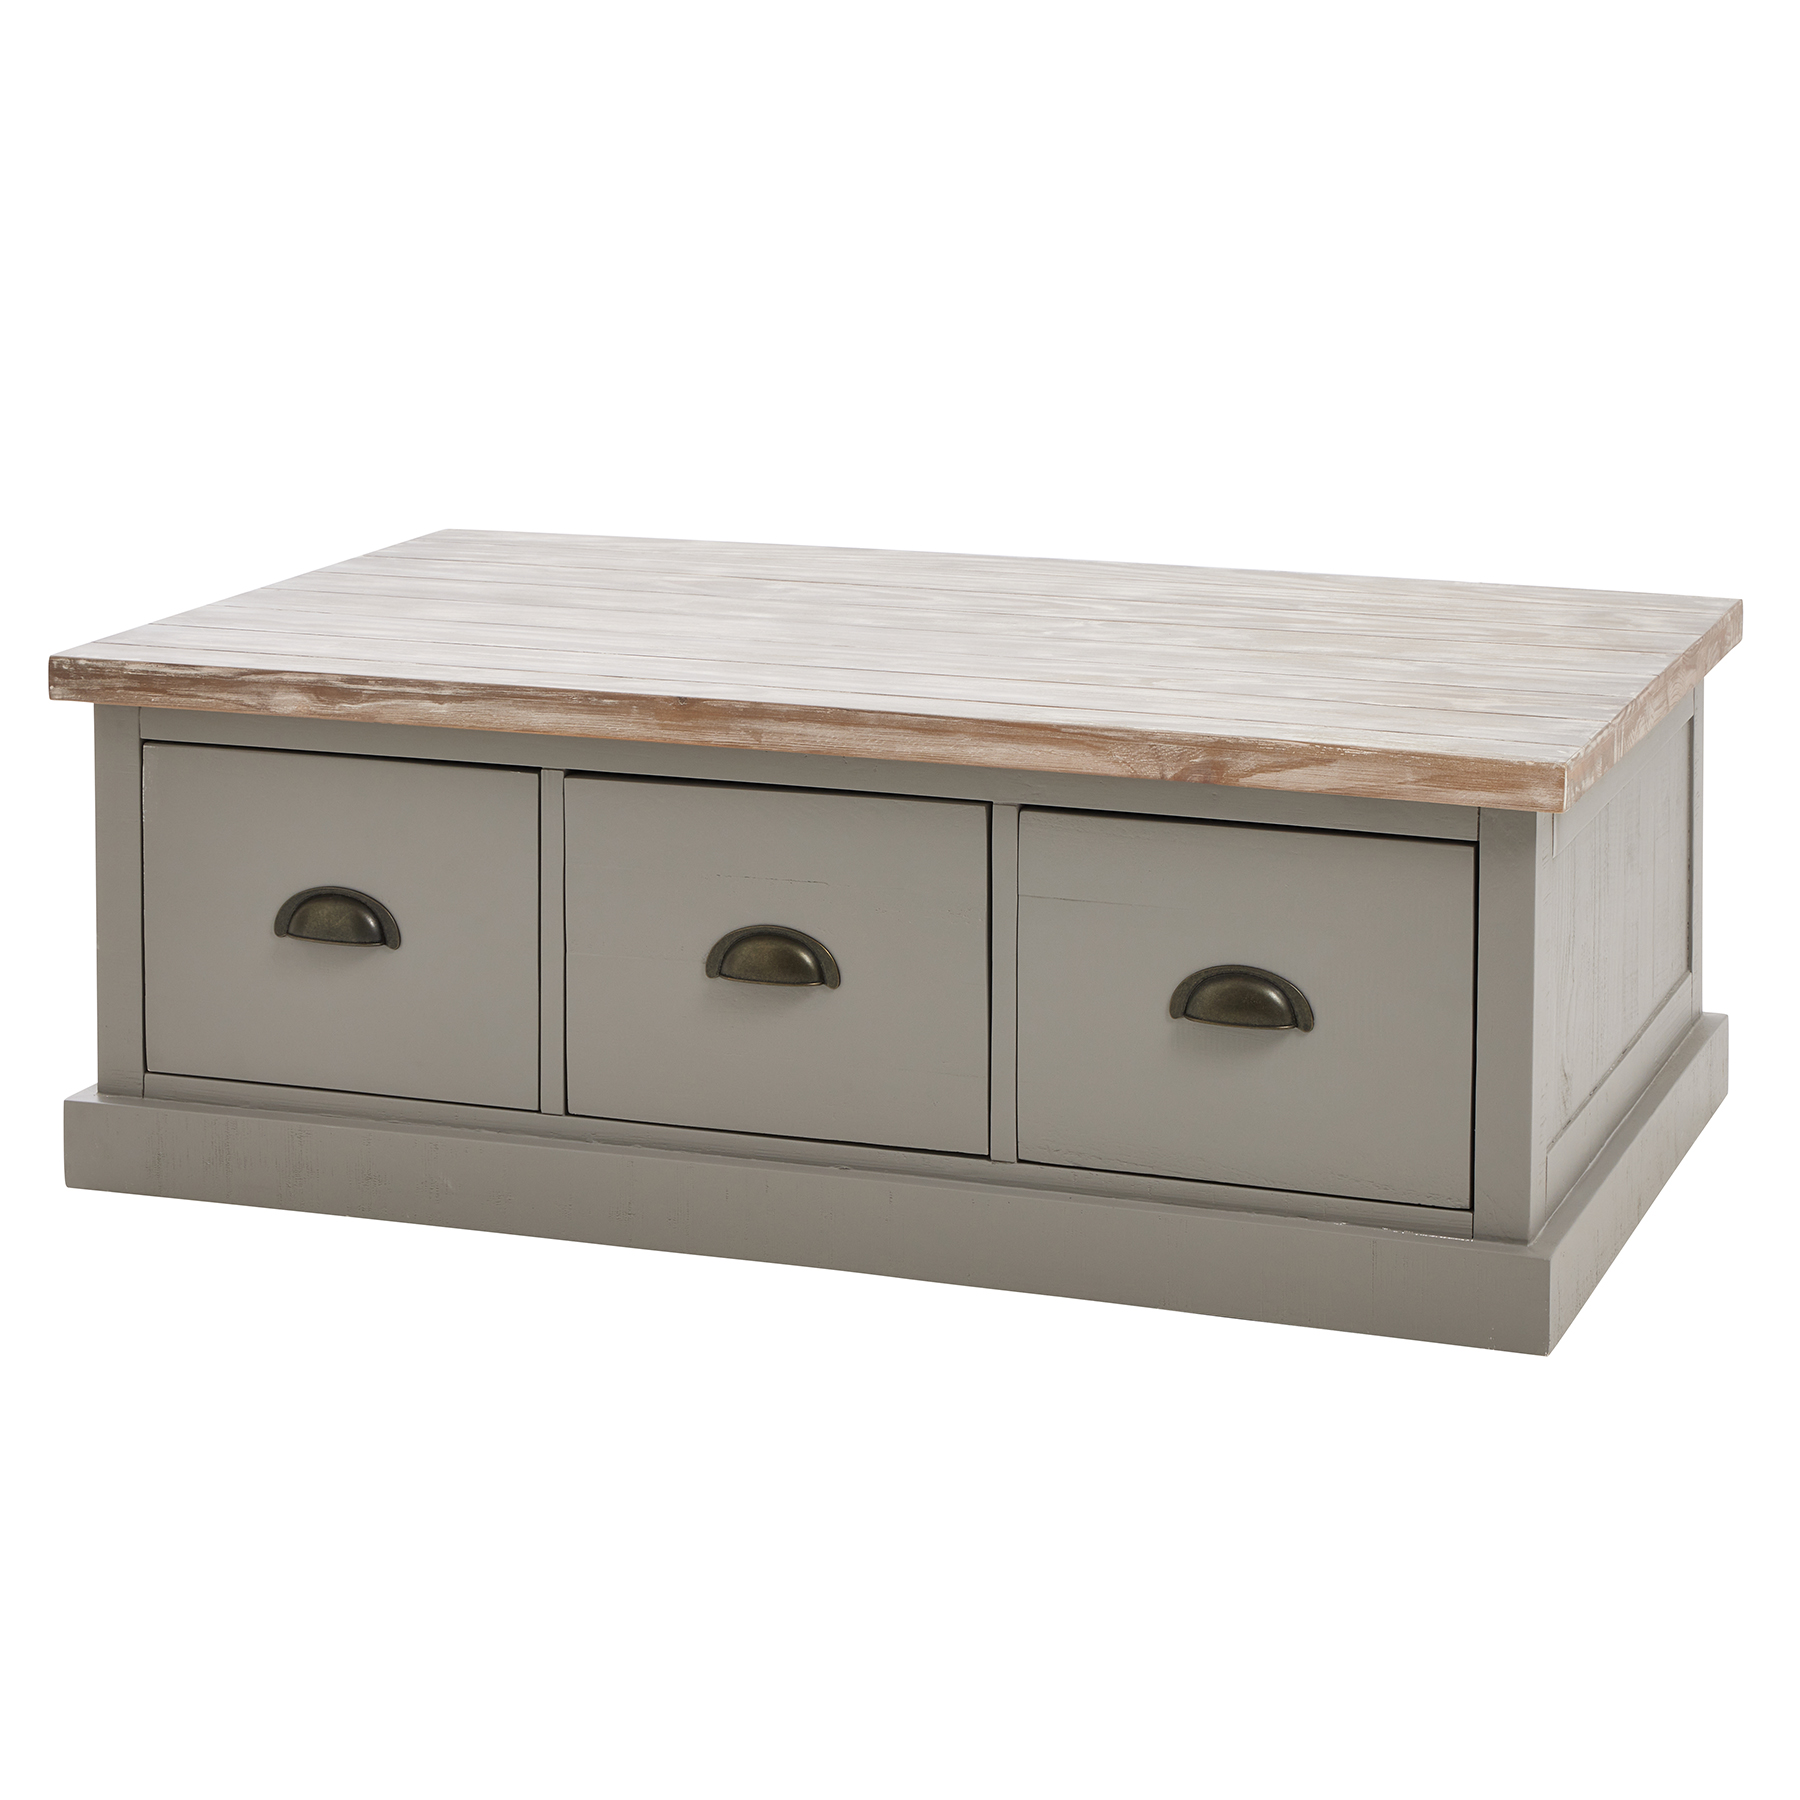 The Oxley Collection Coffee Table - Image 1